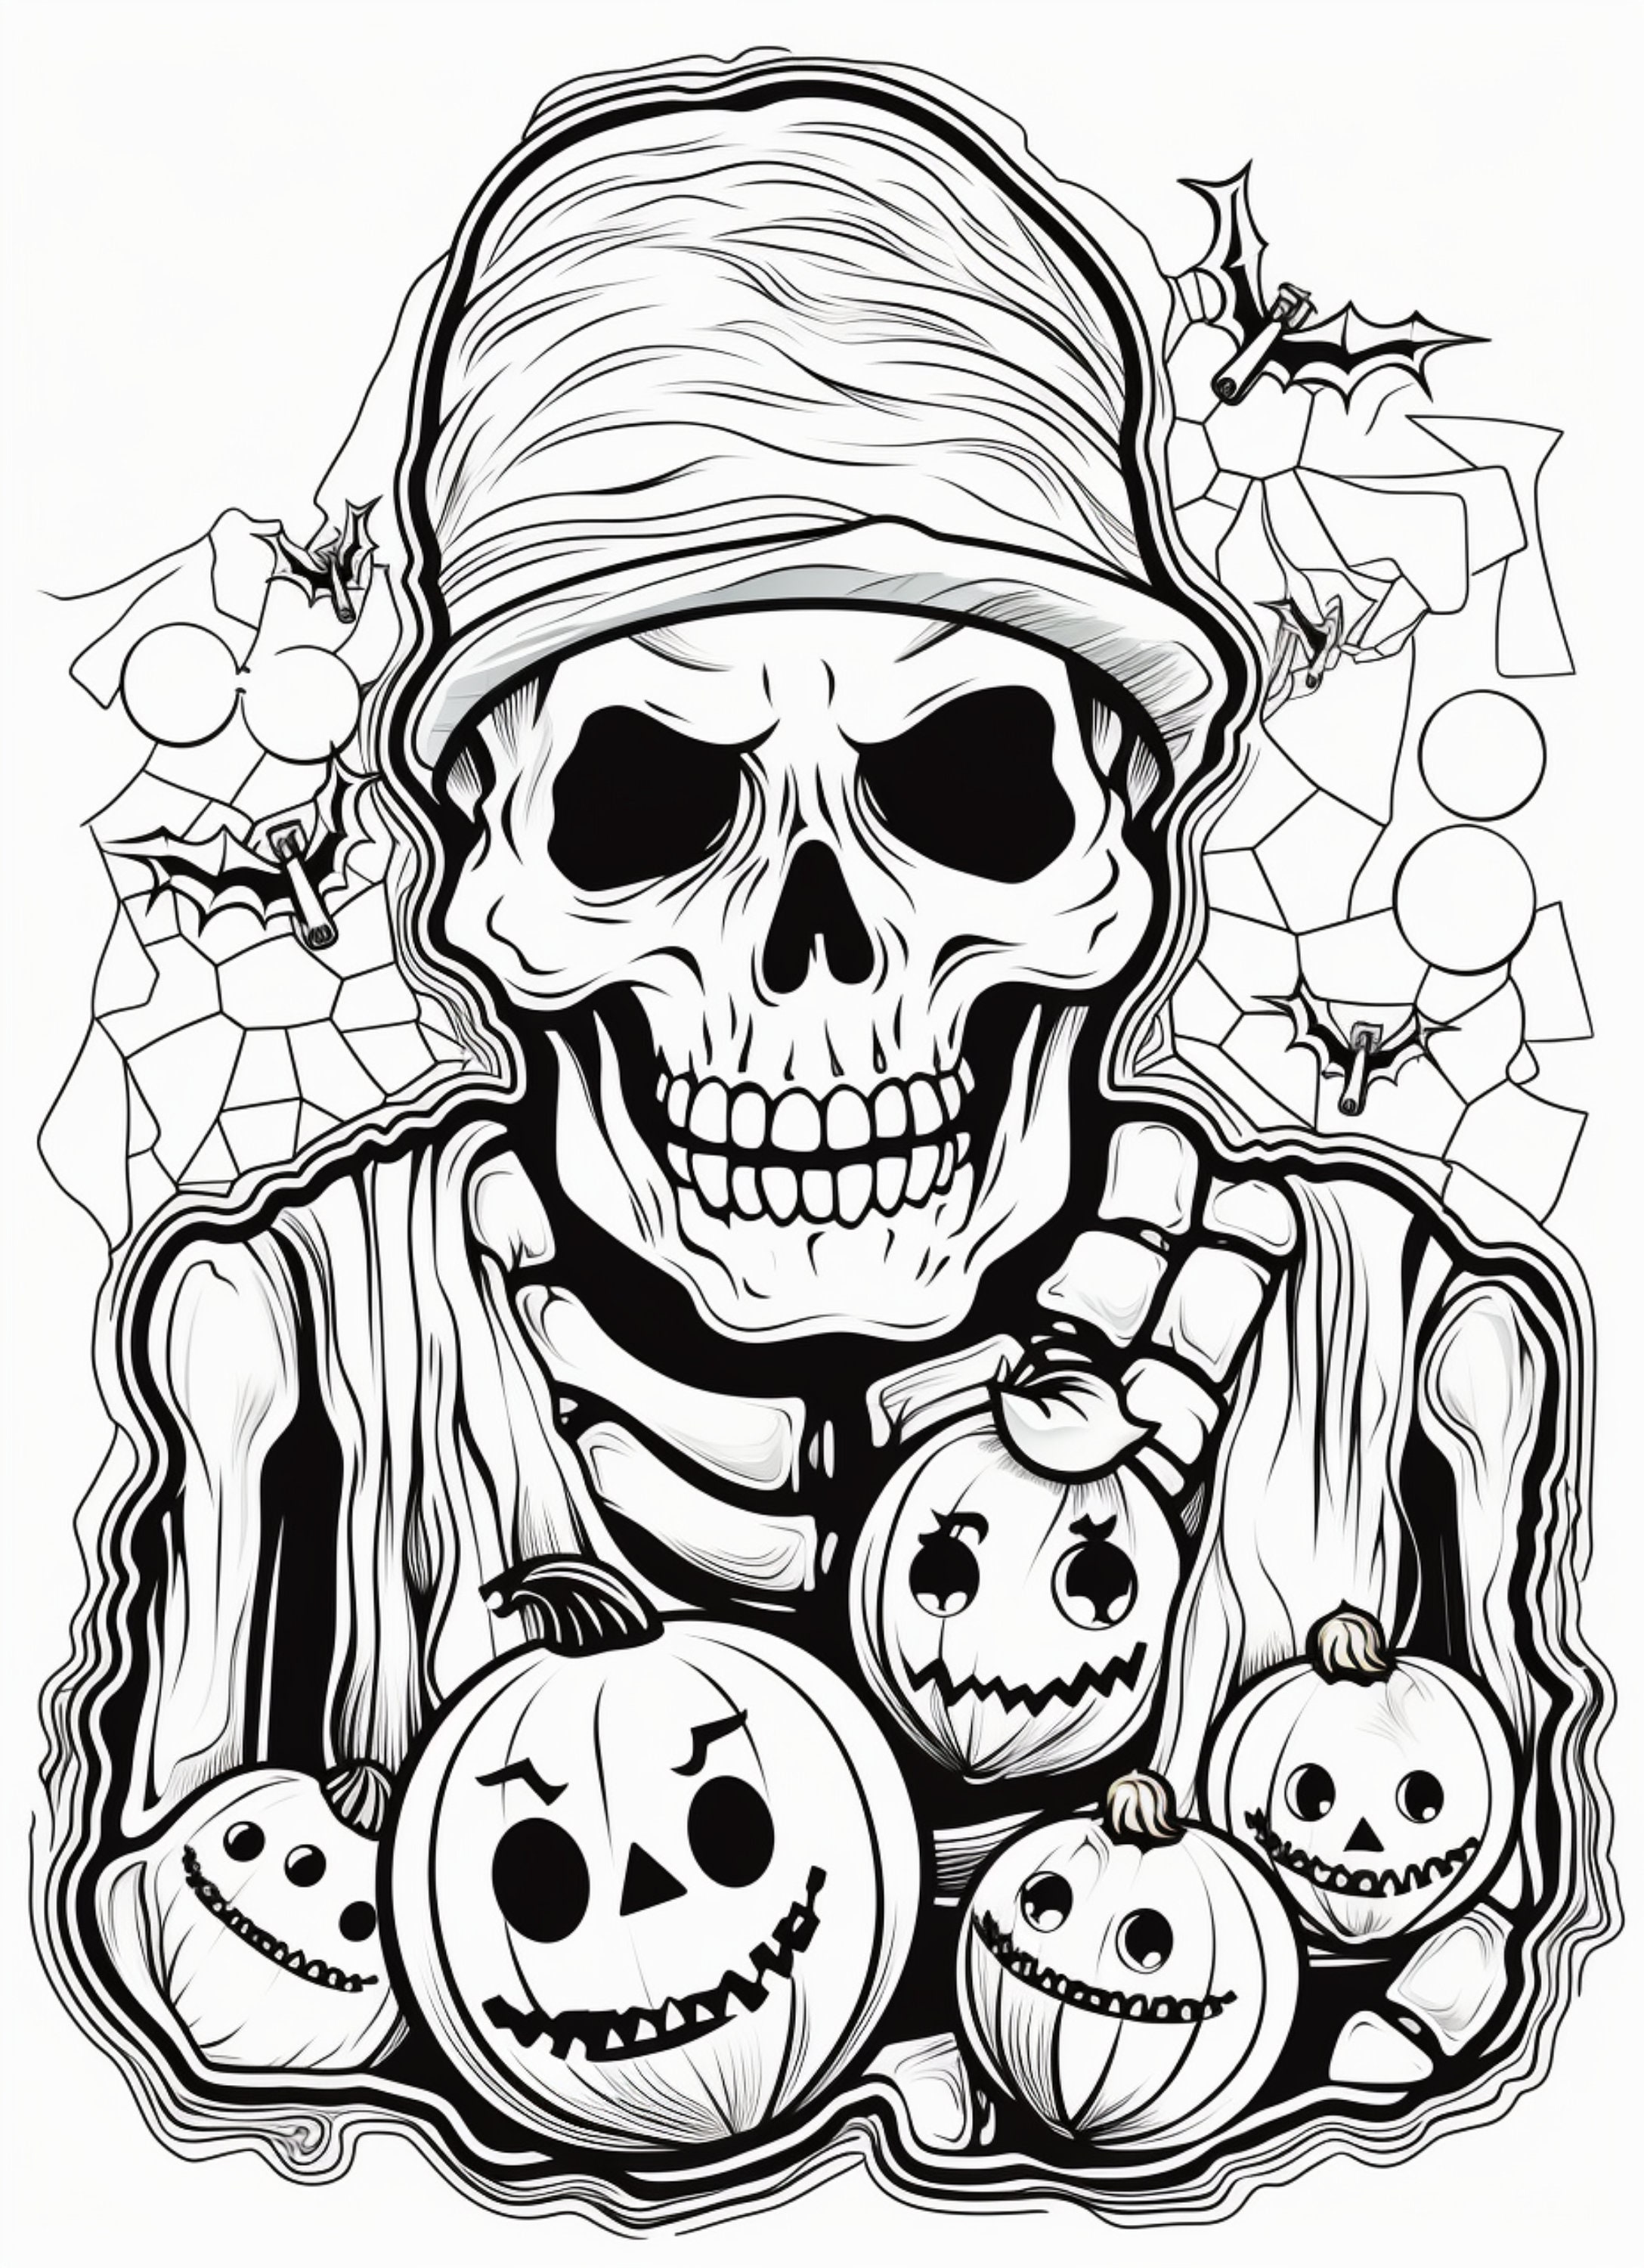 Happy halloween skeleton coloring book page image for kids students or trick